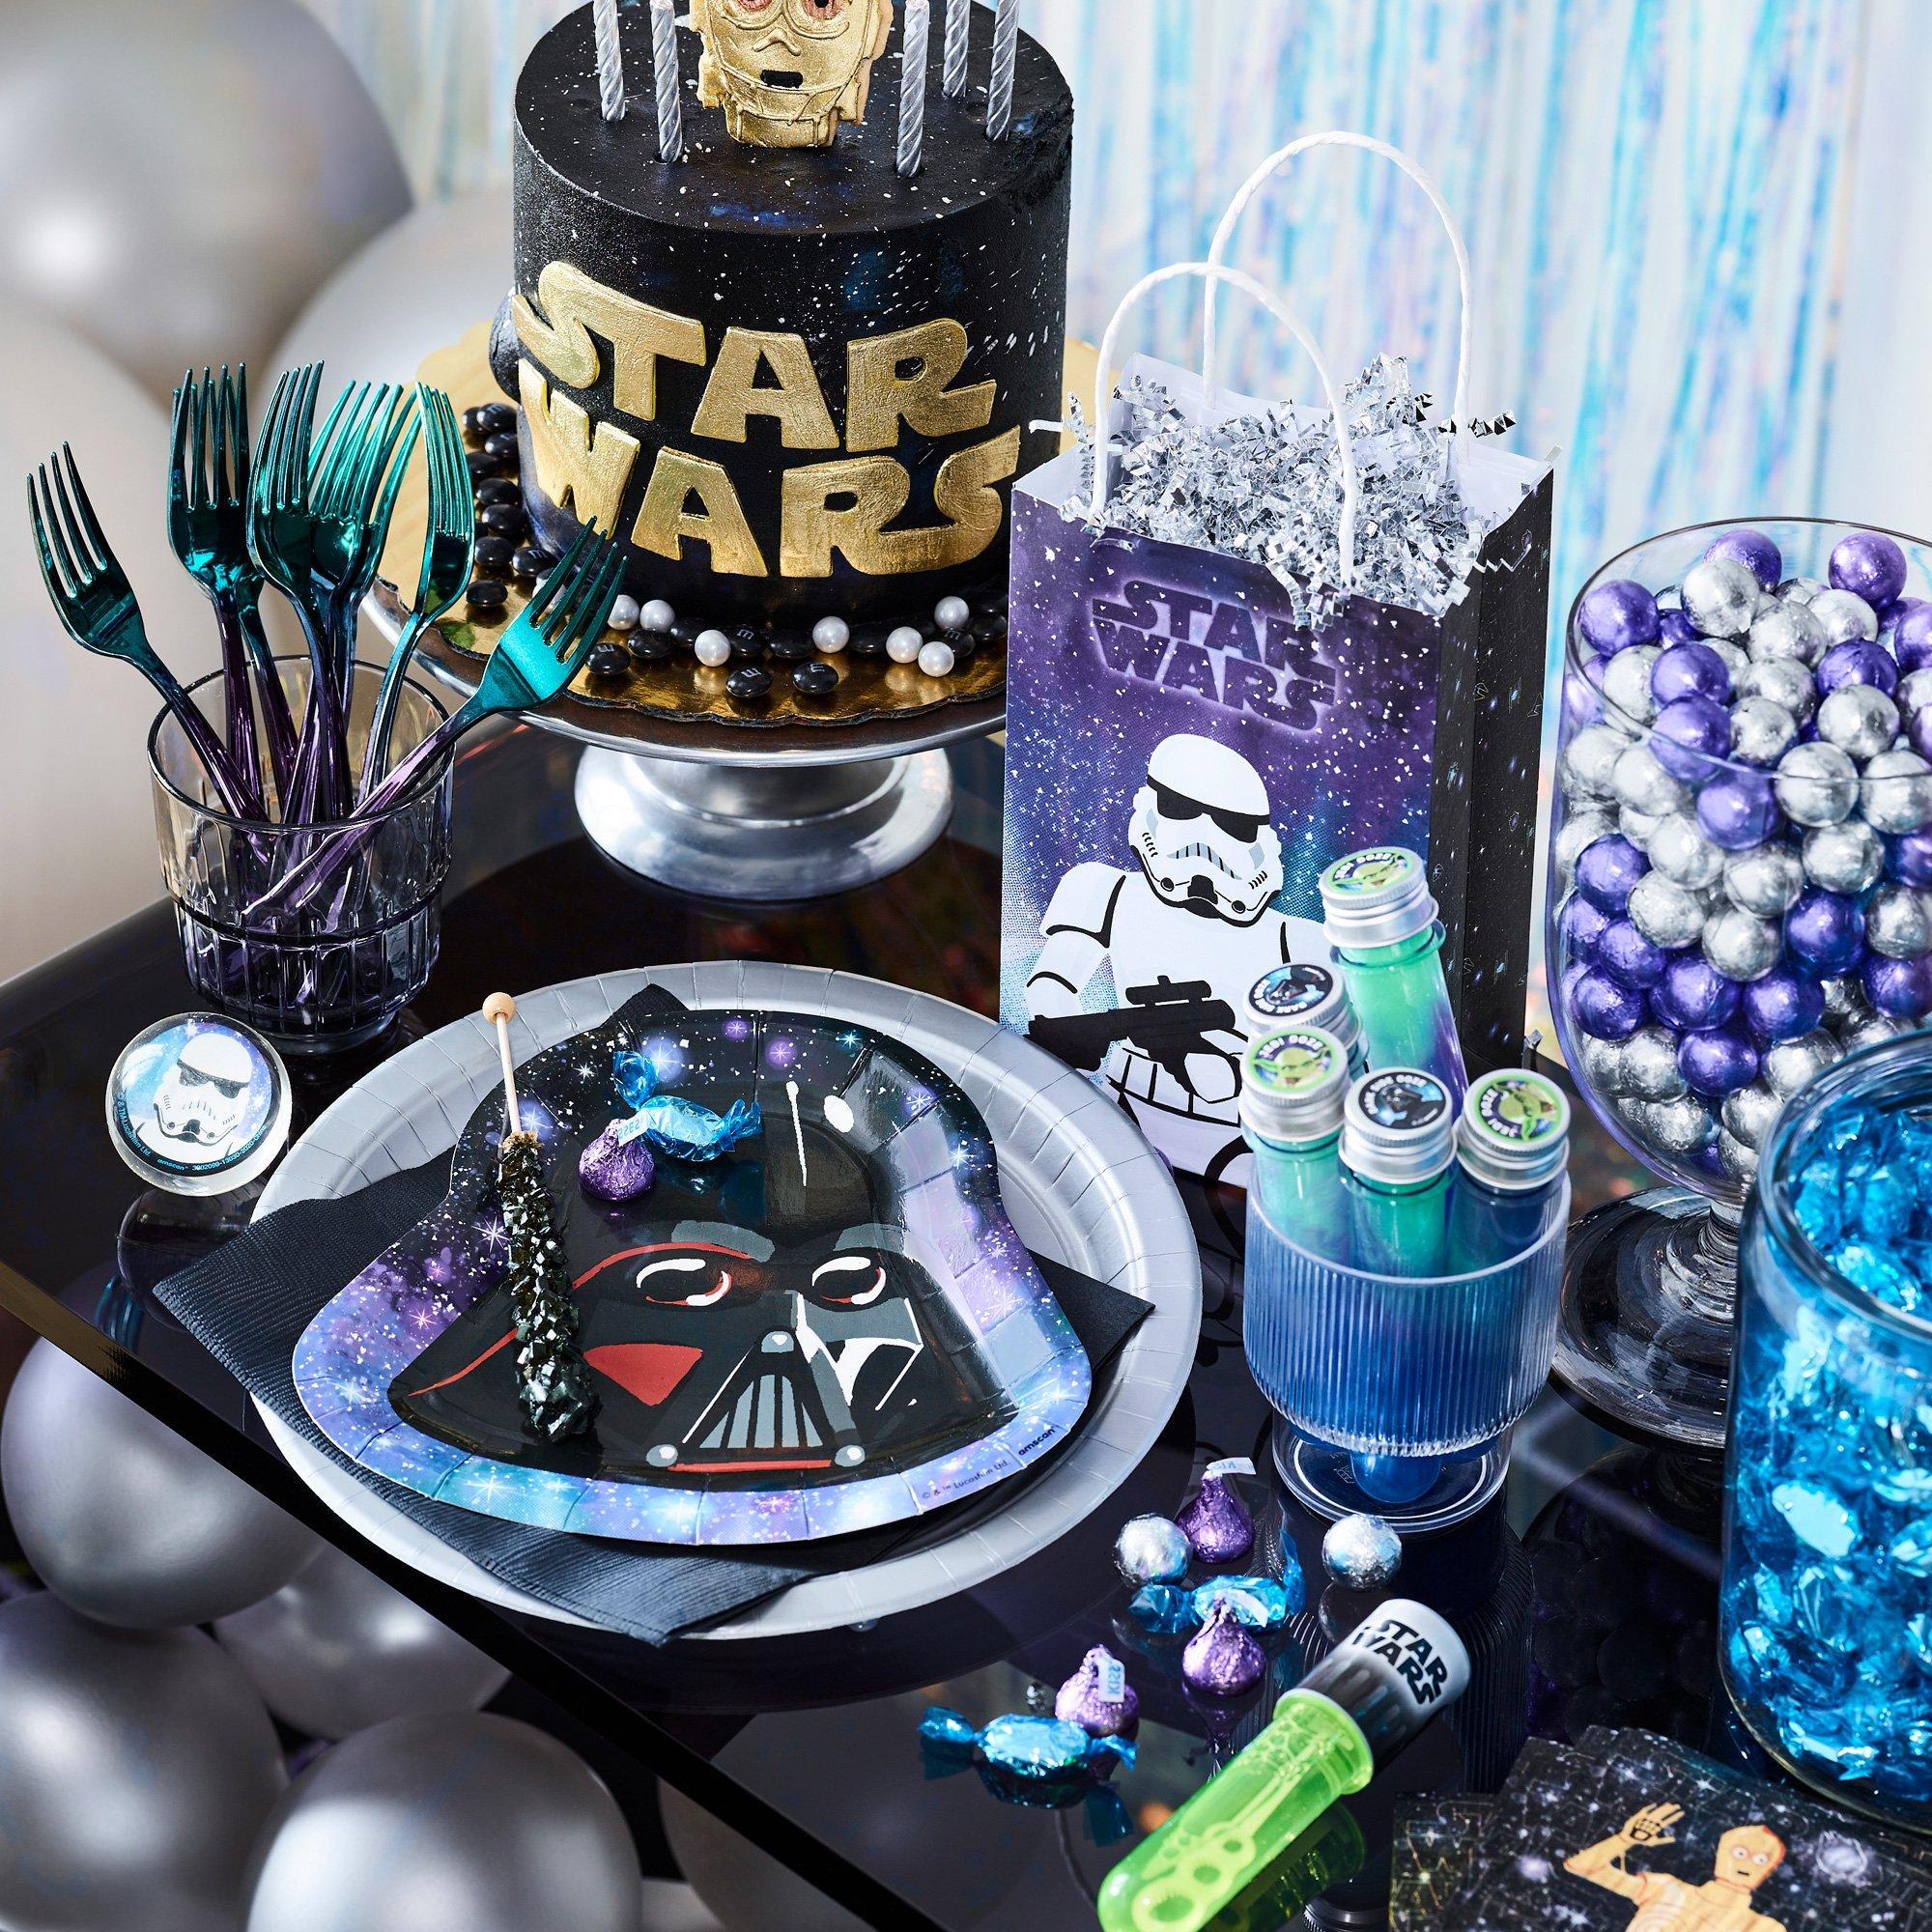 Star Wars Theme Birthday Party Decorations Cup Plate Napkins Cake